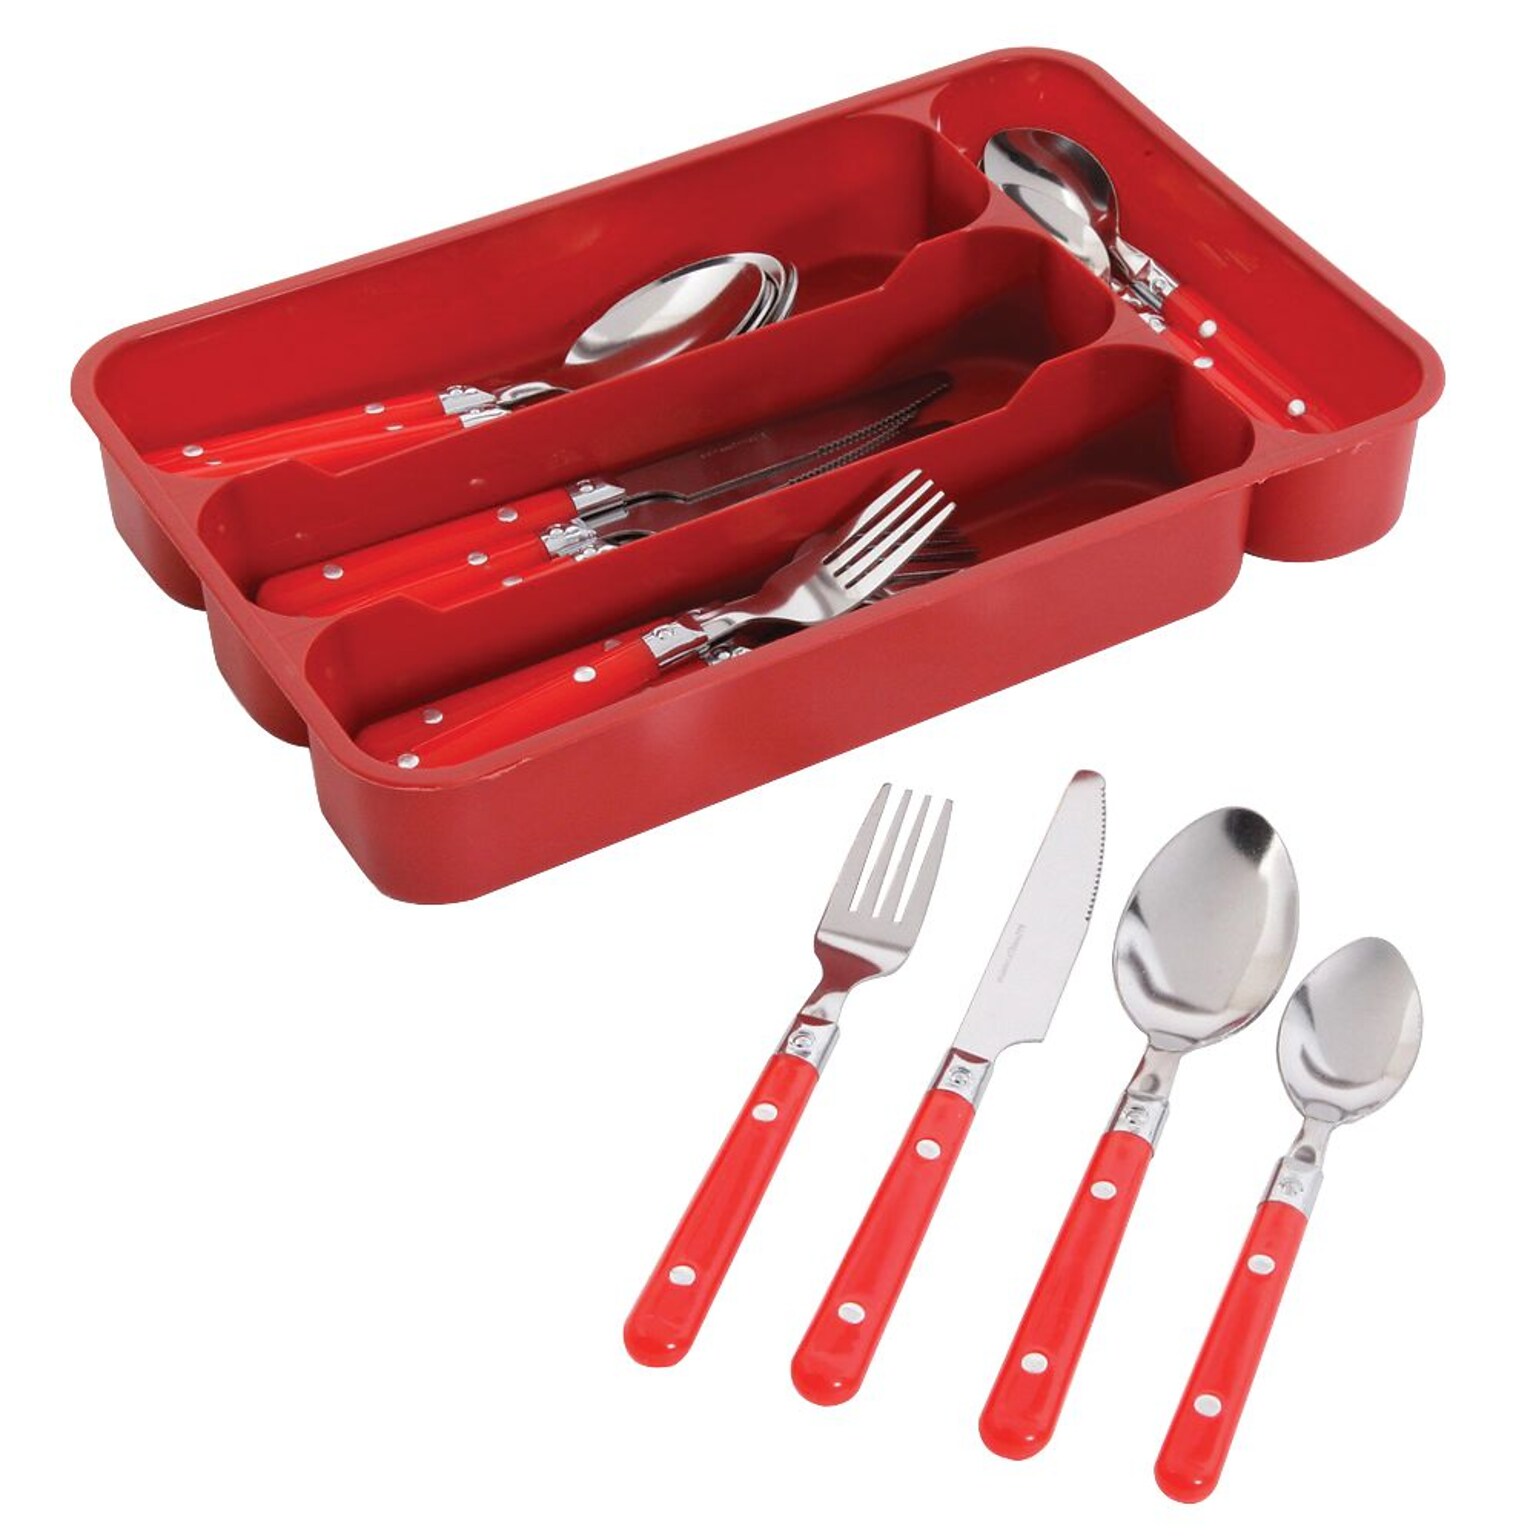 Gibson Home Casual Living Stainless Steel/Polypropylene 24 Piece Flatware Set, Red, 69560.24